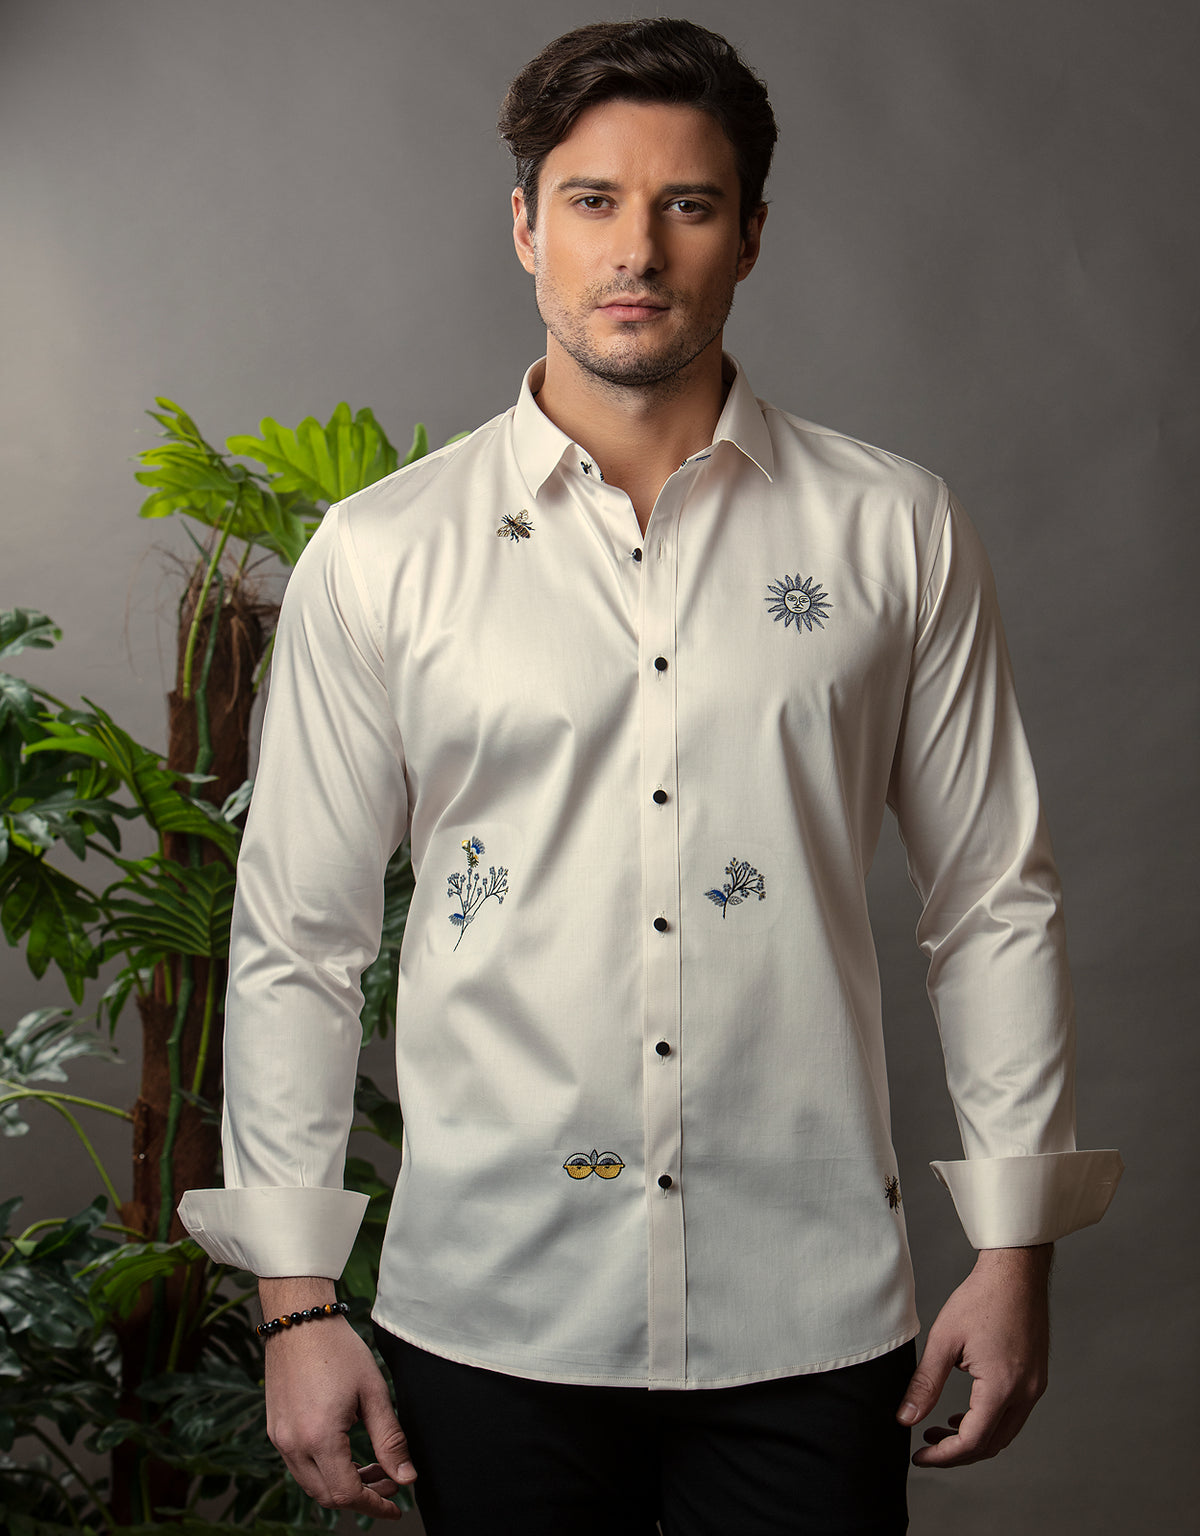 OBJECTS OF NATURE EMBROIDERED SHIRT